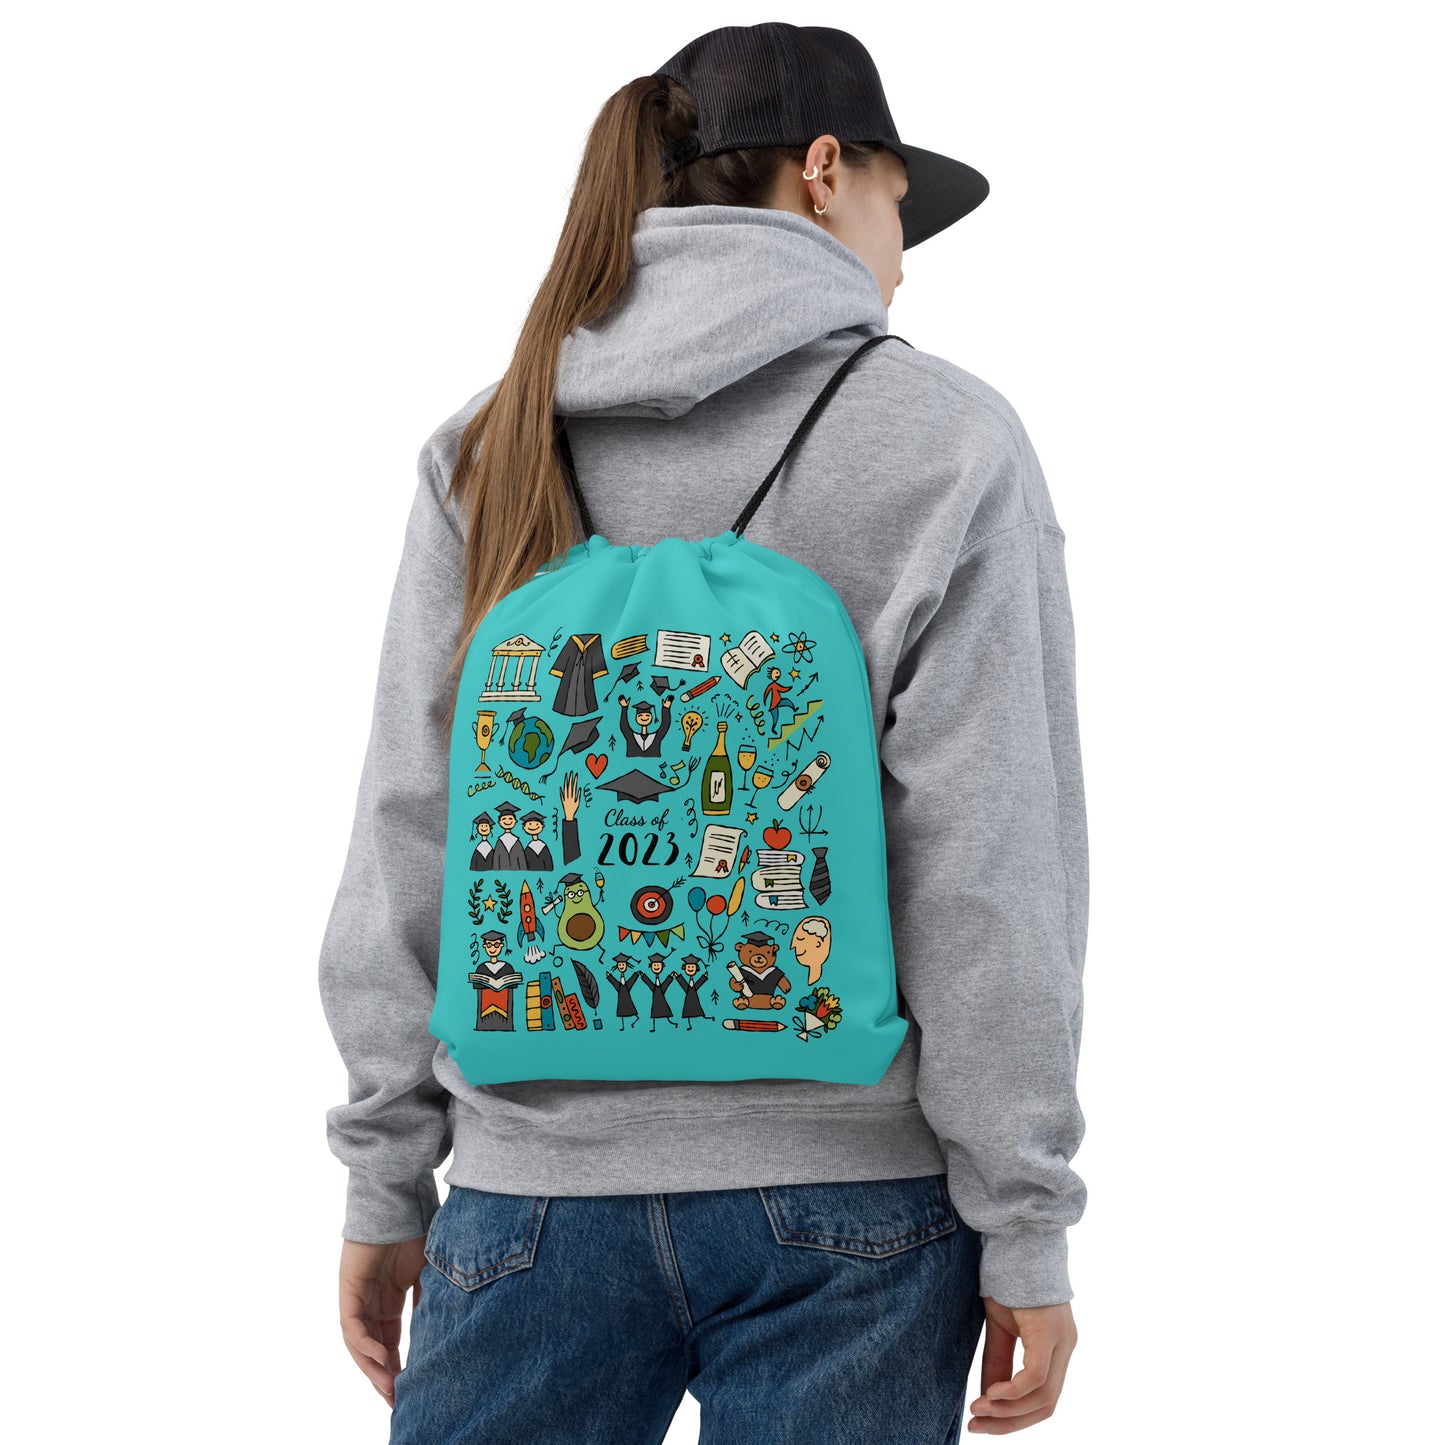 Customised graduation drawstring bag with funny designer print featuring graduates in hats and mantles, school-themed motifs, and a graduation teddy bear.